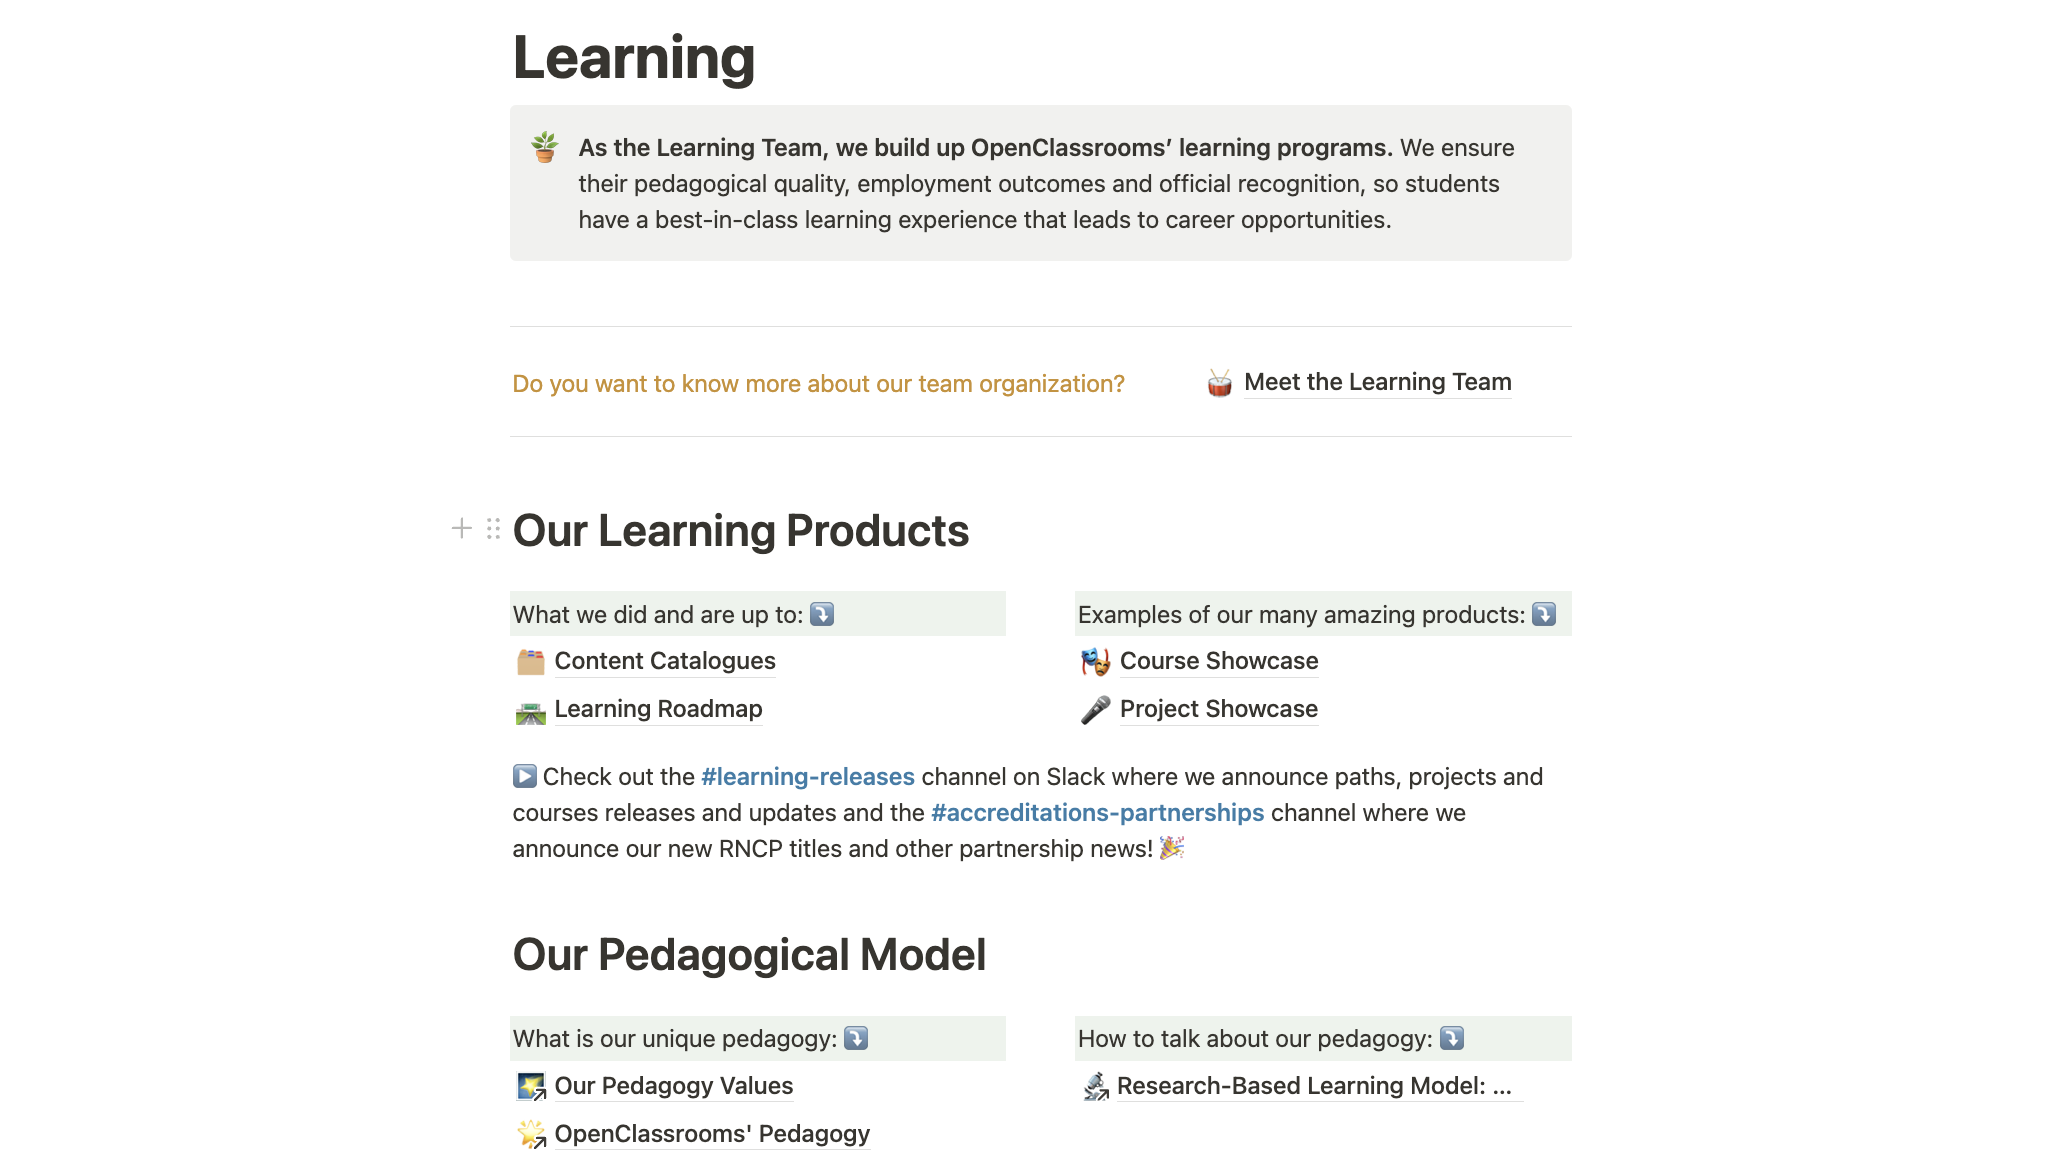 A notion page, with the presentation of the Learning team (As the Learning Team, we build up OpenClassrooms’ learning programs. We ensure their pedagogical quality, employment outcomes and official recognition, so students have a best-in-class learning